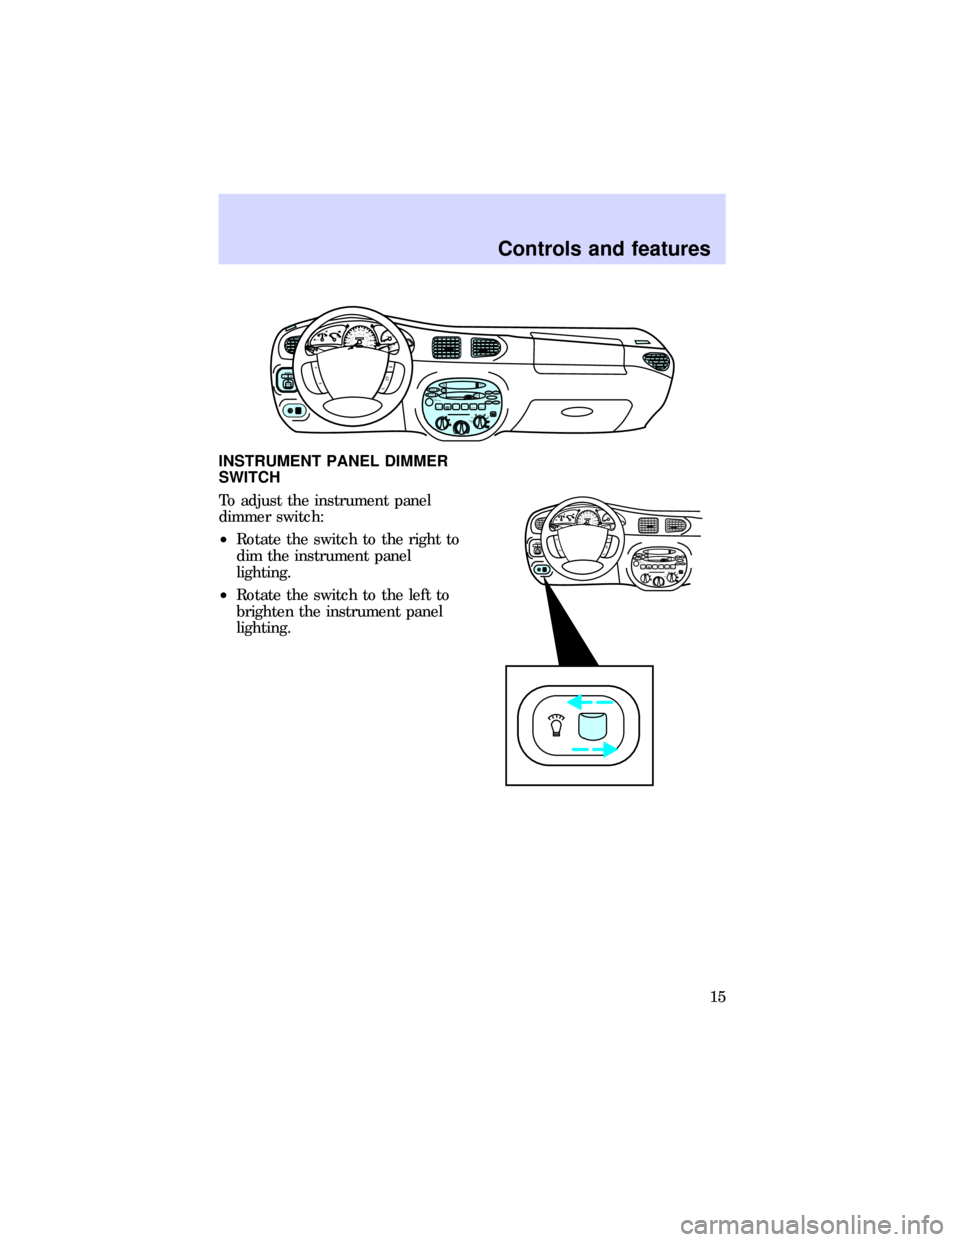 FORD ESCORT 1997 6.G User Guide INSTRUMENT PANEL DIMMER
SWITCH
To adjust the instrument panel
dimmer switch:
²Rotate the switch to the right to
dim the instrument panel
lighting.
²Rotate the switch to the left to
brighten the inst